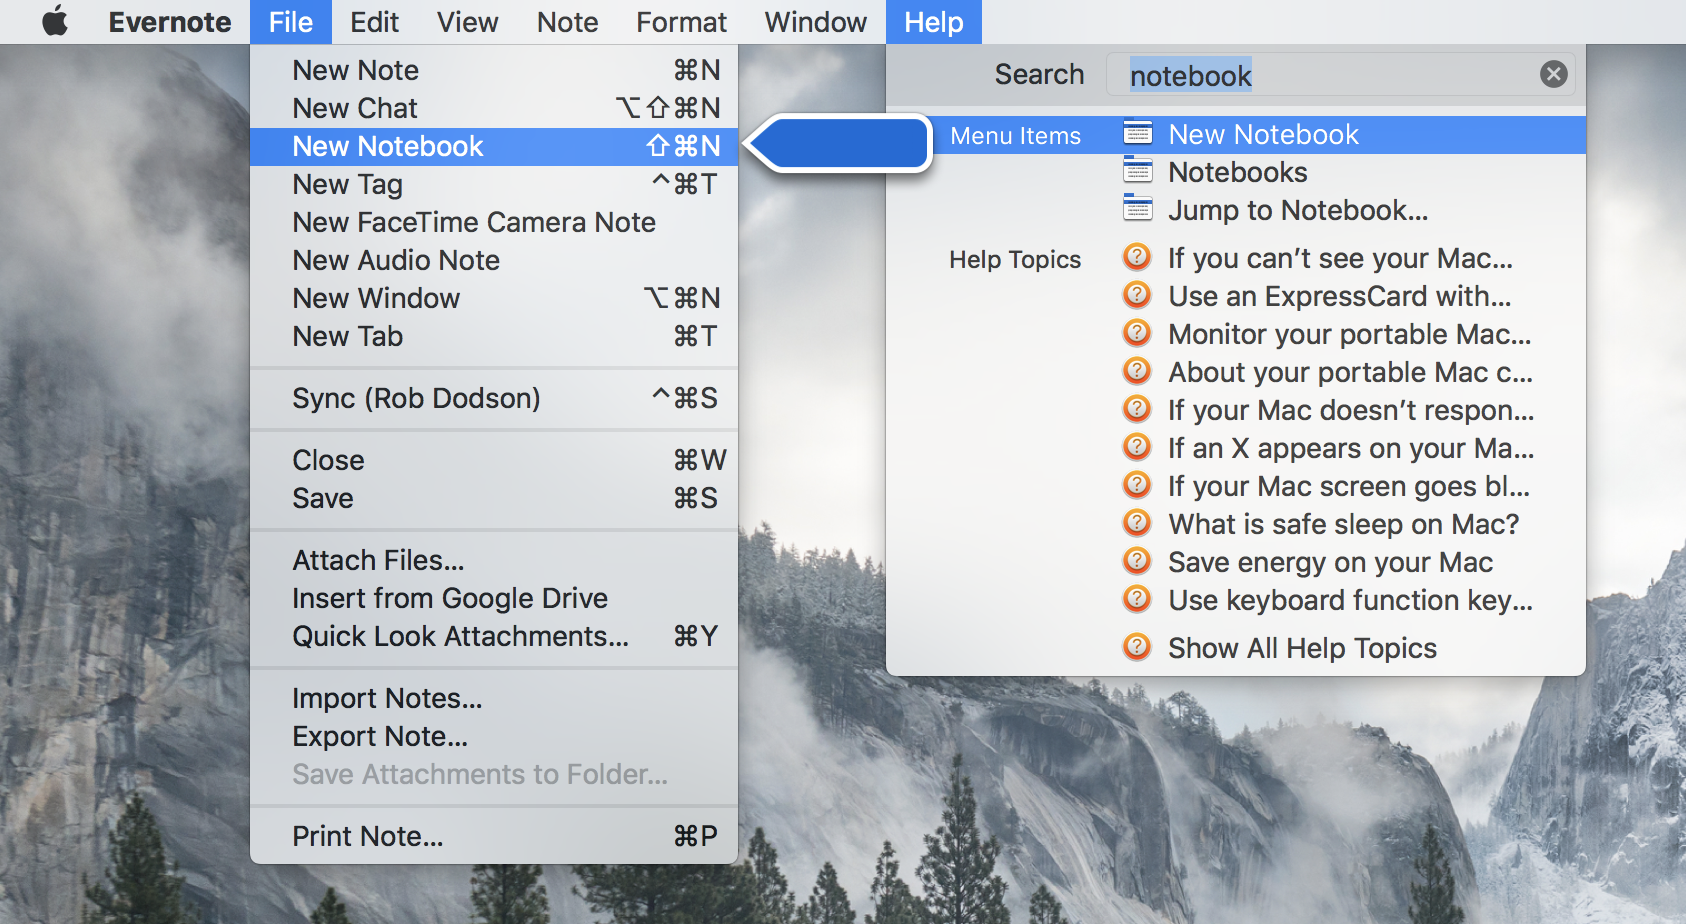 Using Evernote's Help menu to find the New Notebook command